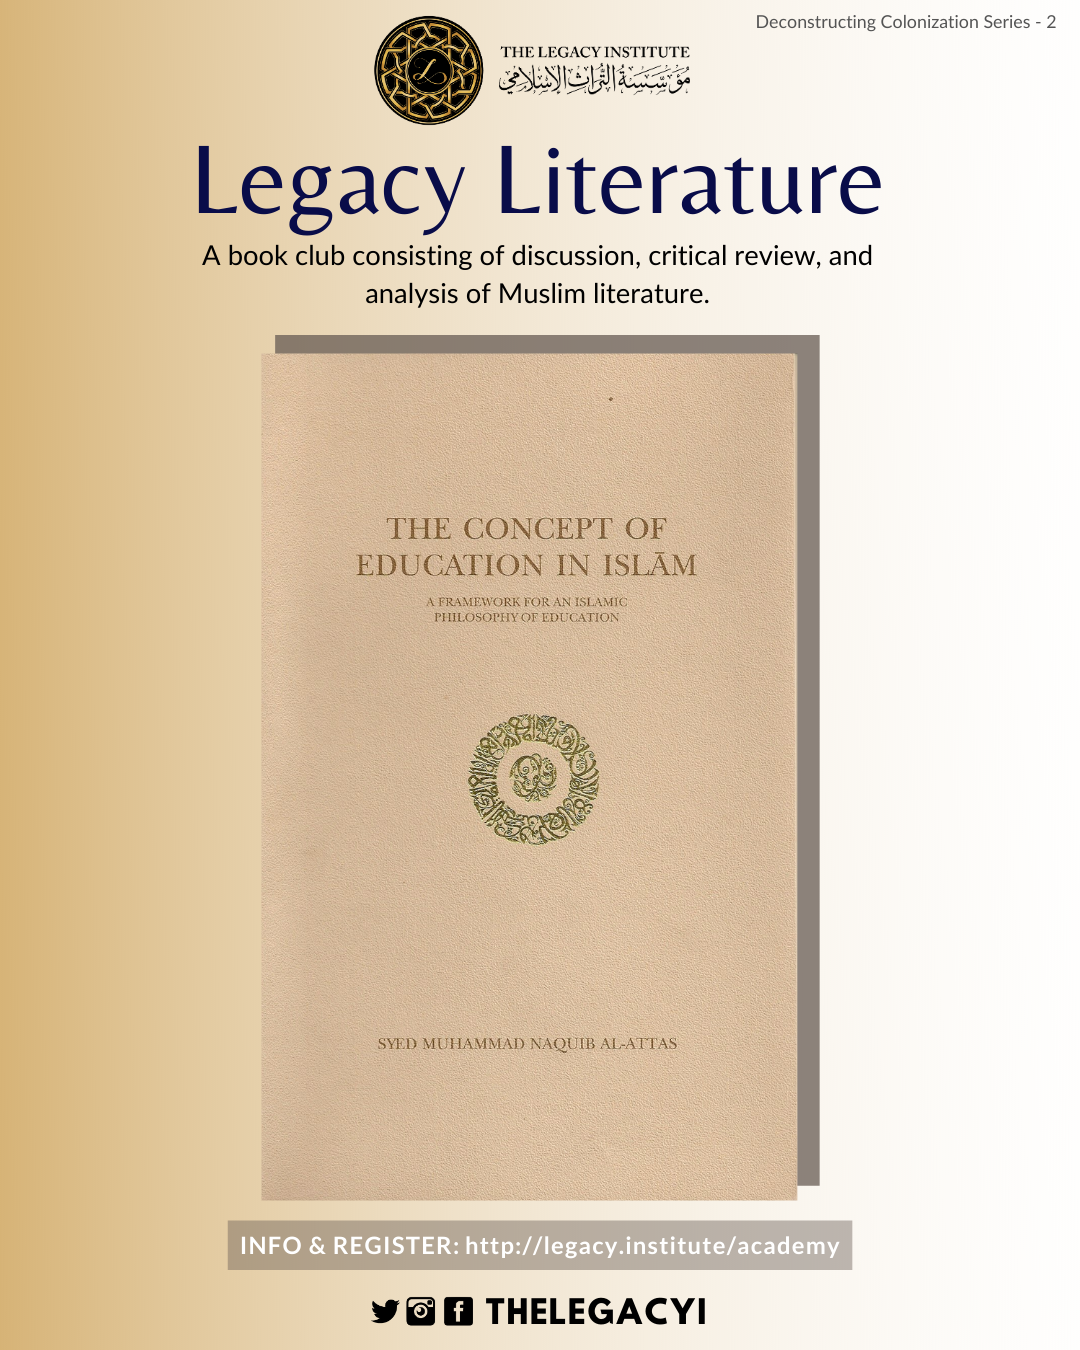 Legacy Literature 2 Islam Secularism The Concept Of Education In Islam By Syed Muhammad Naquib Al Attas The Legacy Institute